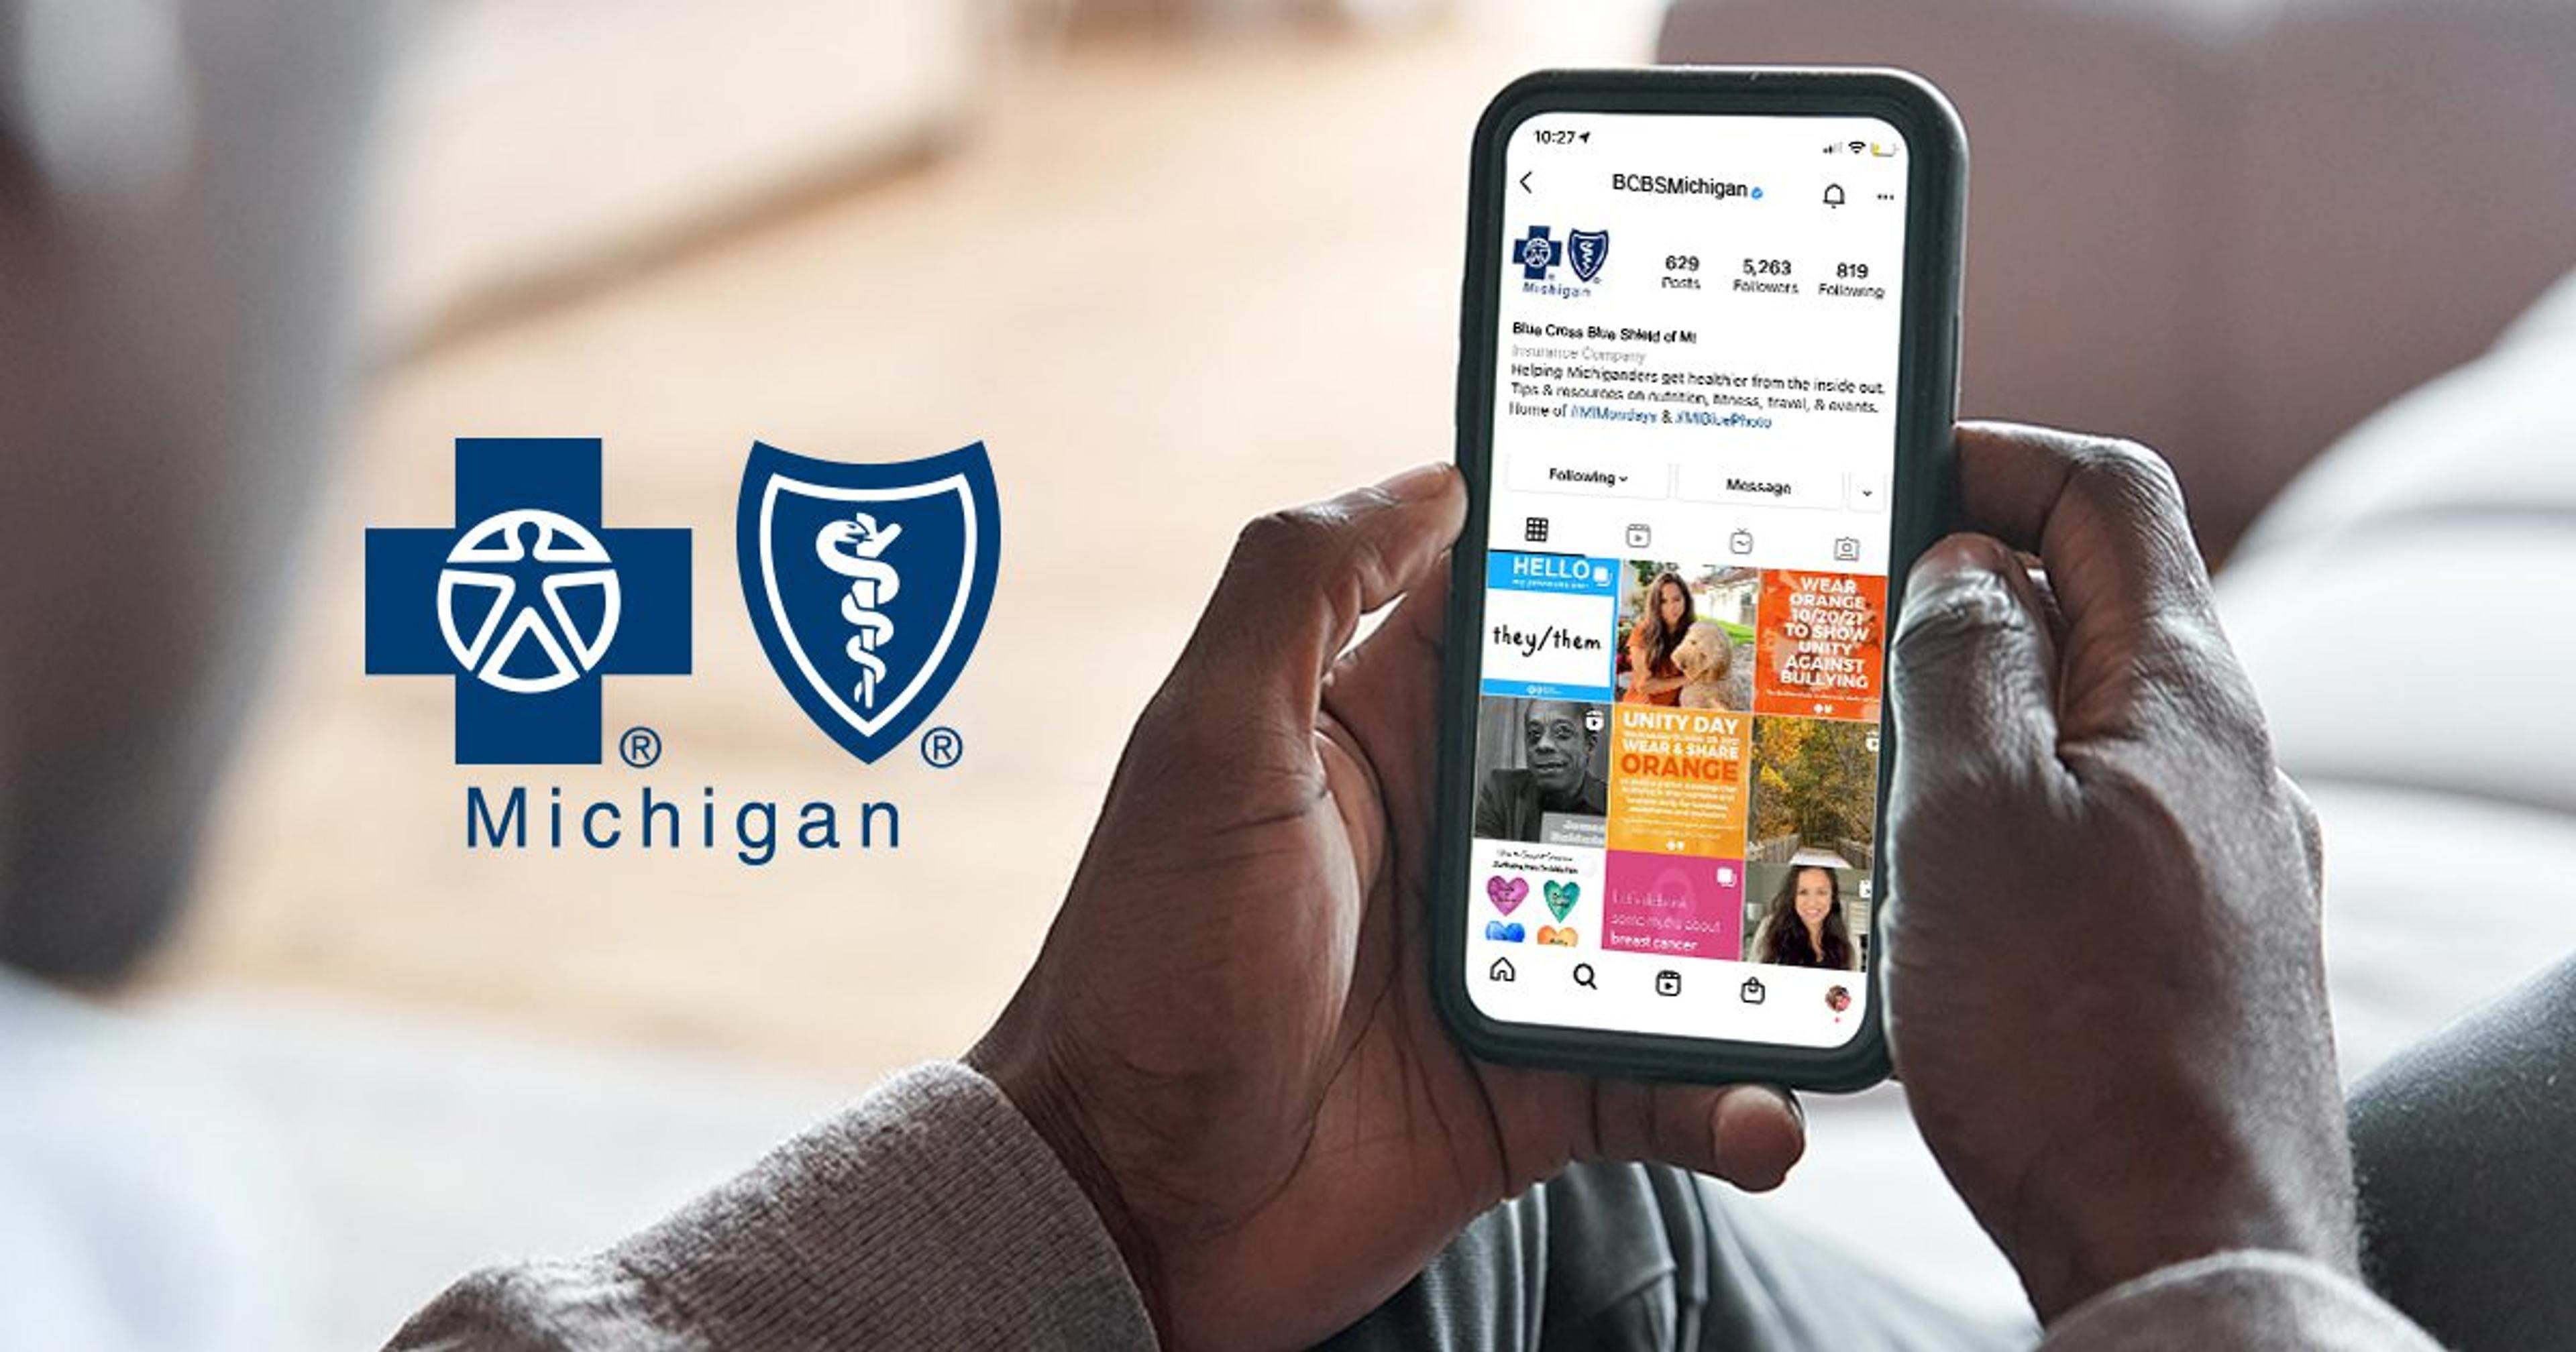 Blue Cross Blue Shield of Michigan logo next to phone with Instagram account open